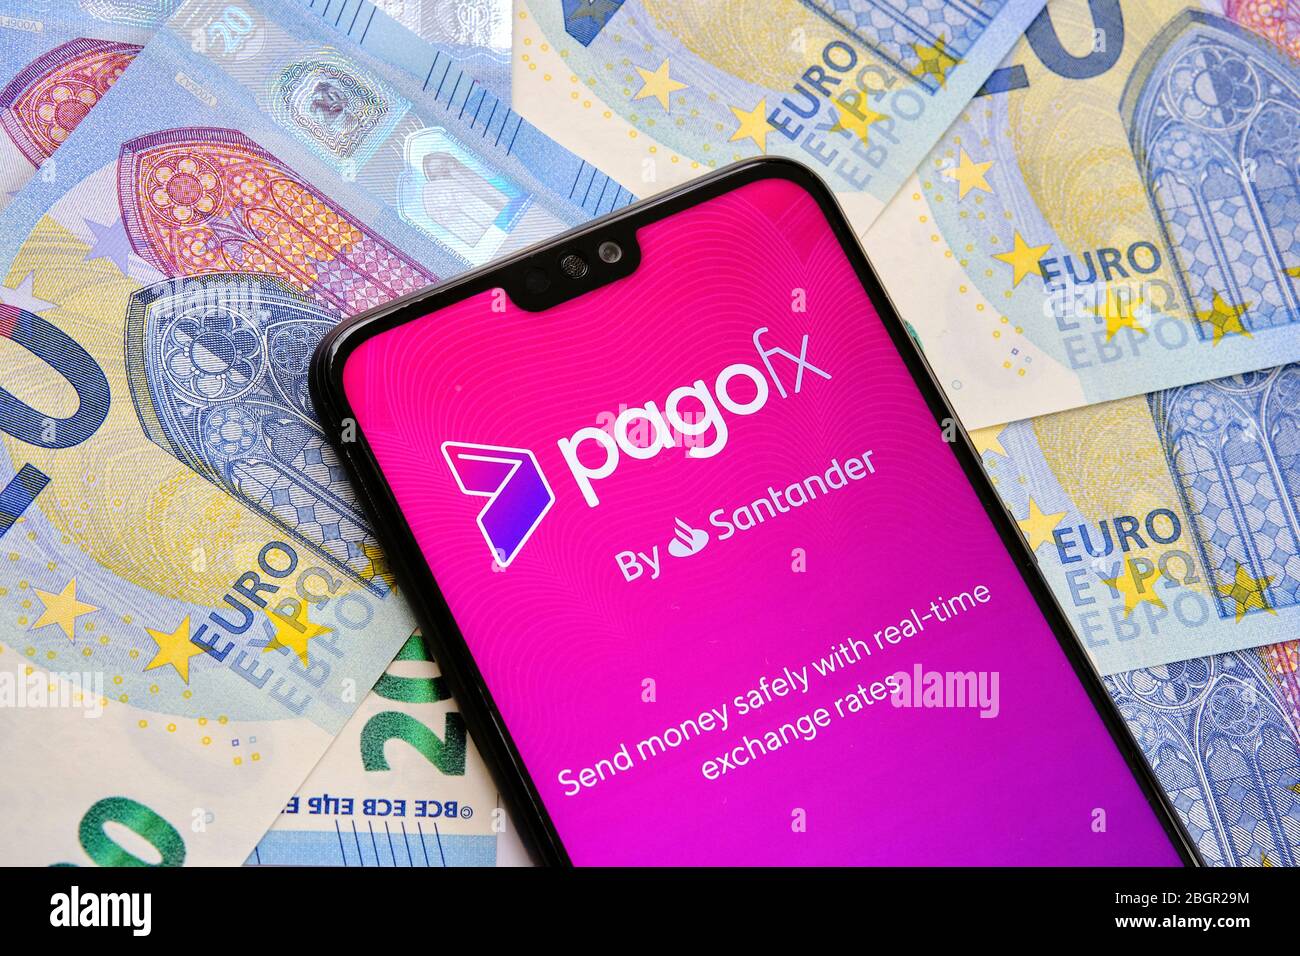 Stone / United Kingdom - April 18 2020: PagoFx money transfer app on the smartphone screen placed on top of euro banknotes. Concept. Stock Photo